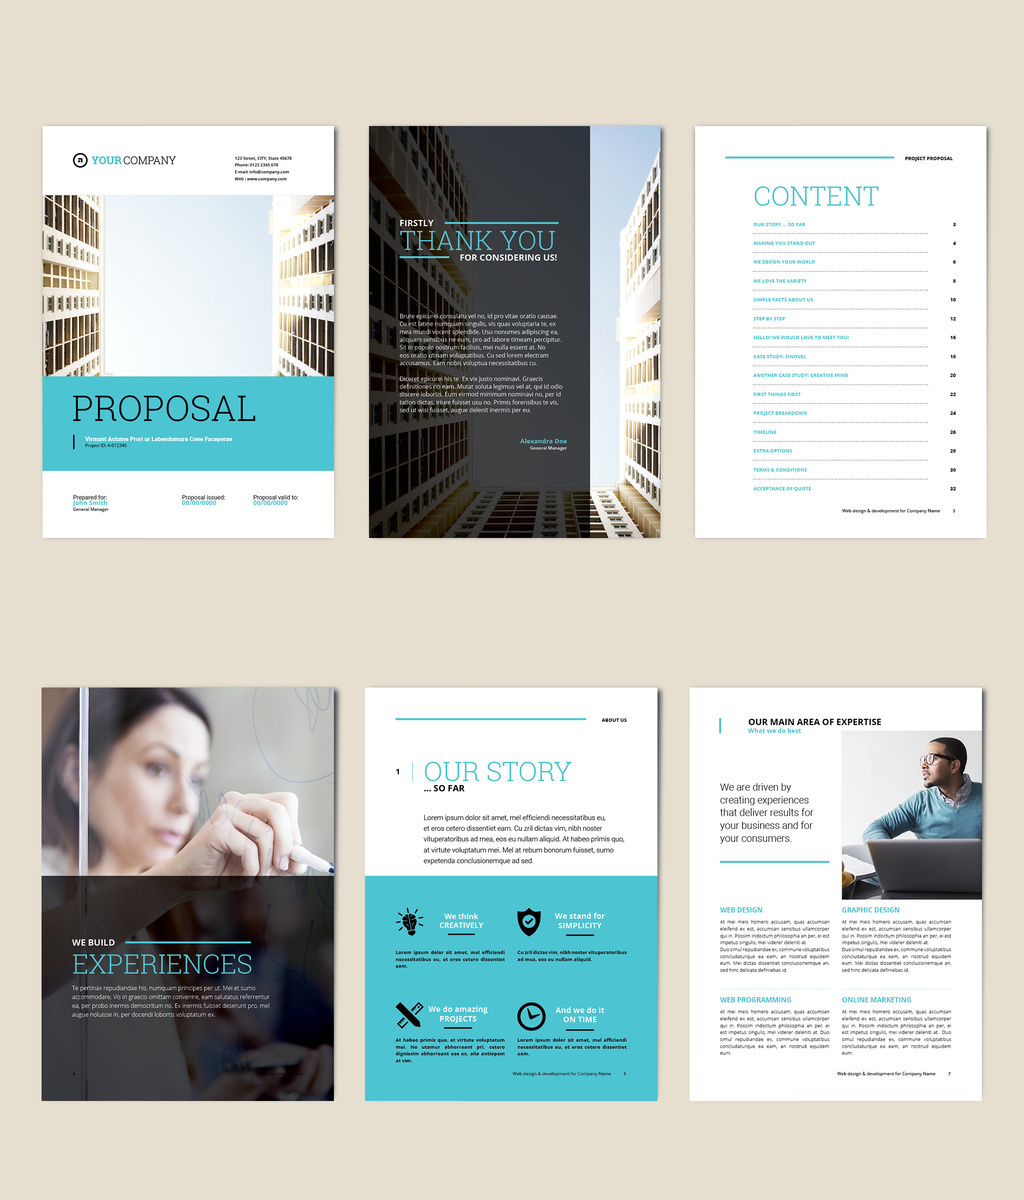 Free Business Proposal Template for Adobe InDesign